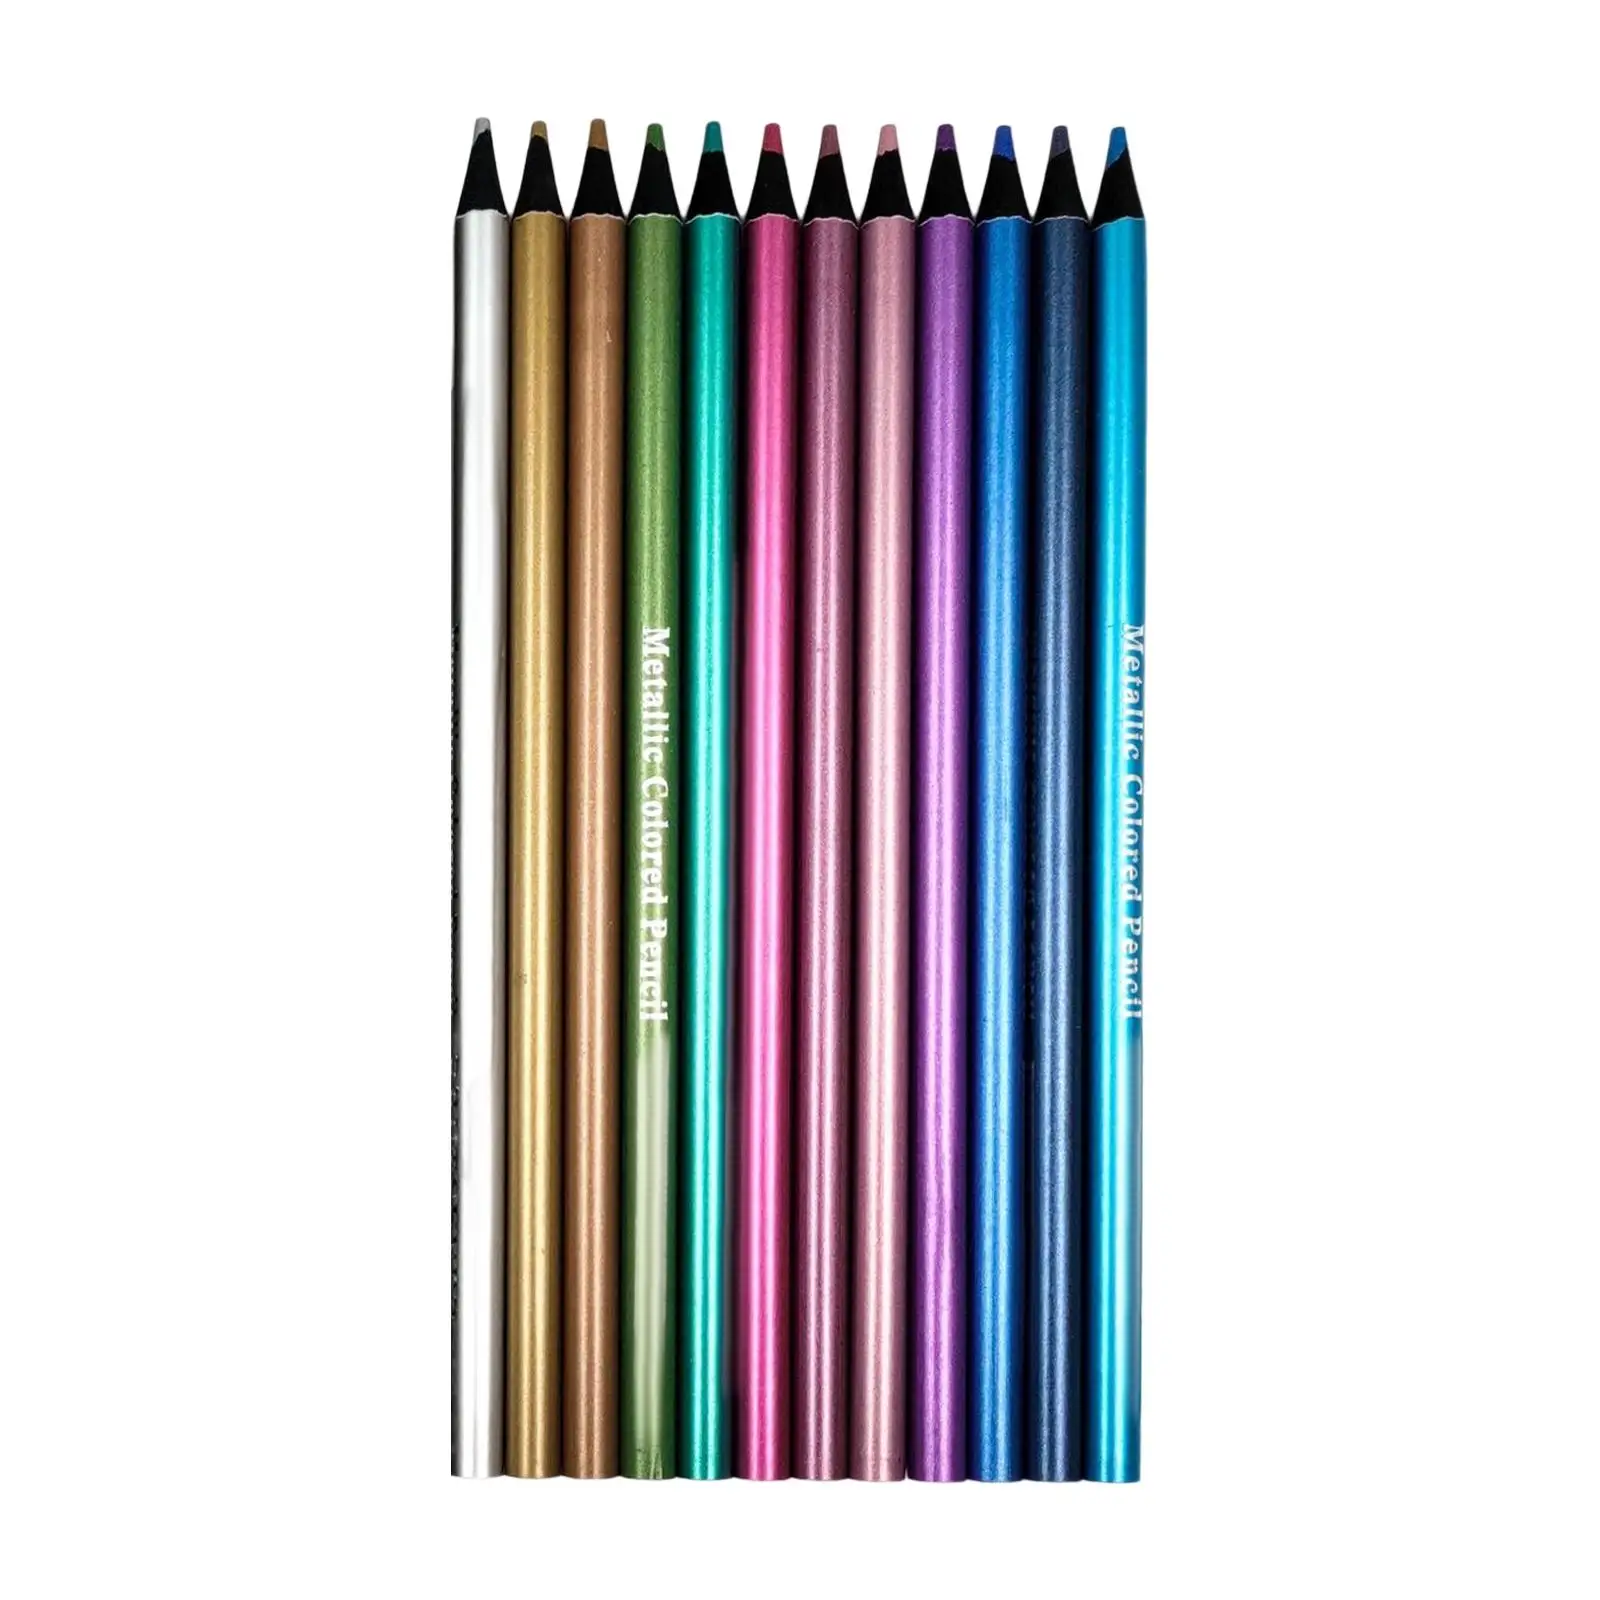 12 Color Metallic Colored Pencils Shading Sketching Coloring Painting Drawing Drawing Pencils for Birthday Gift Art Supplies